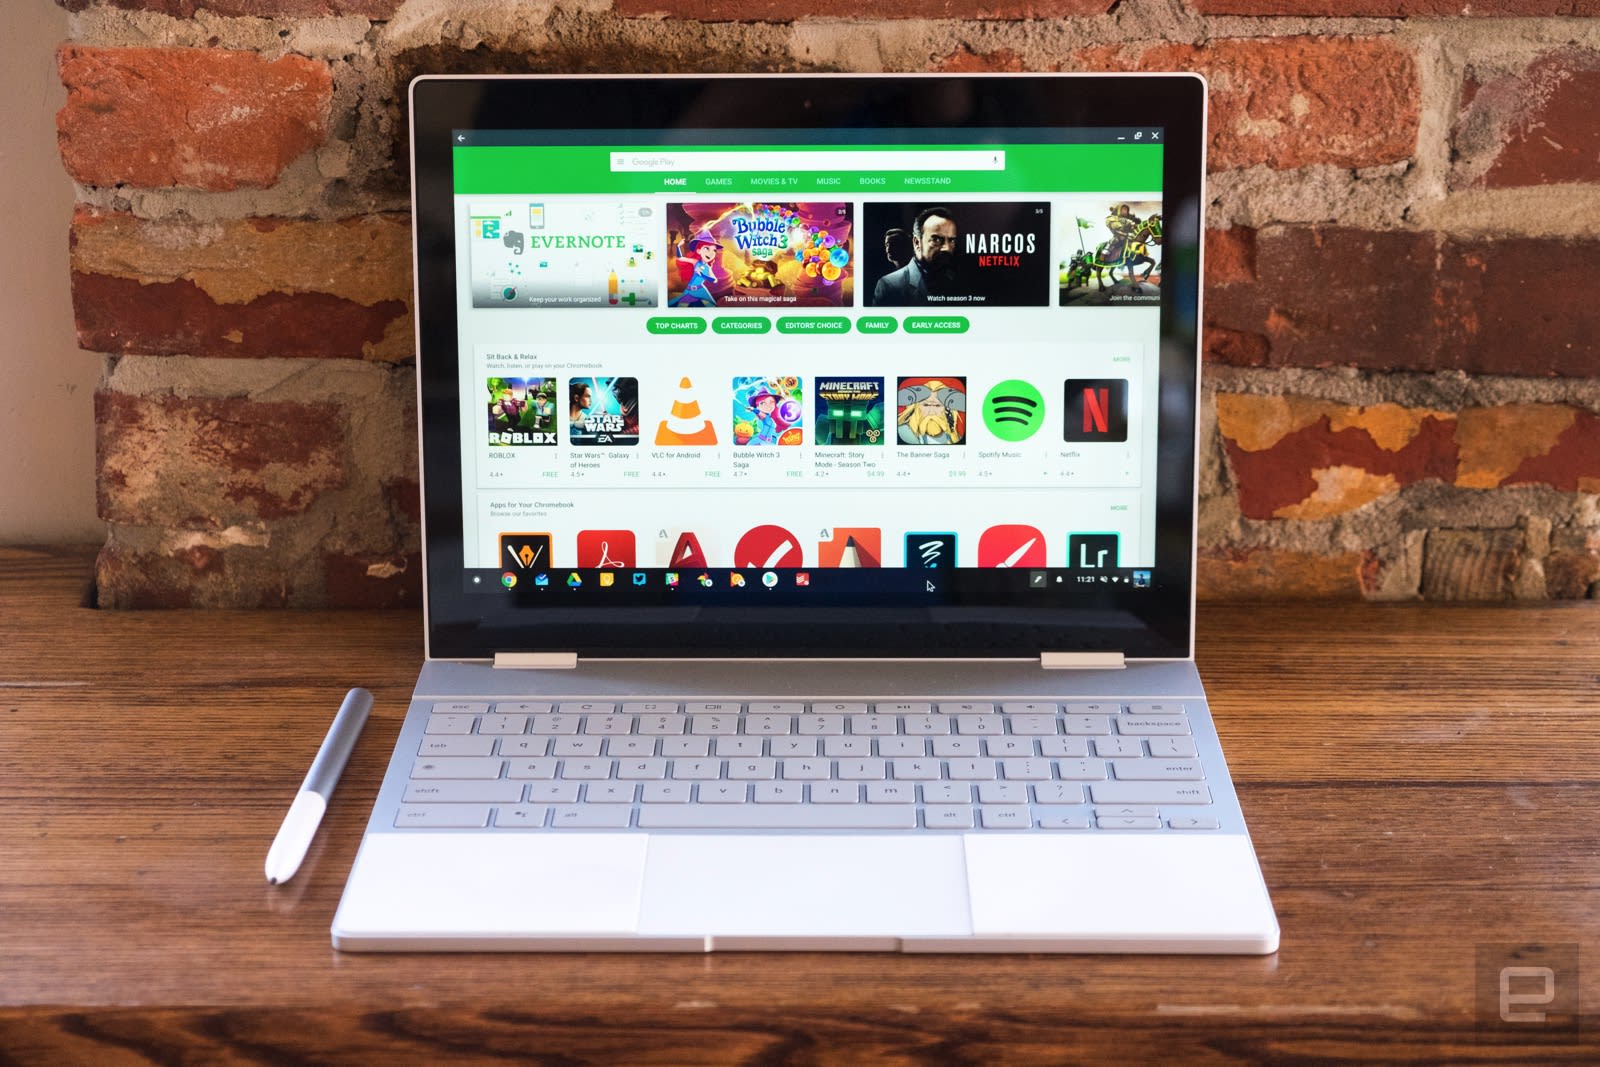 Google Pixelbook review: A premium Chromebook that's worth the